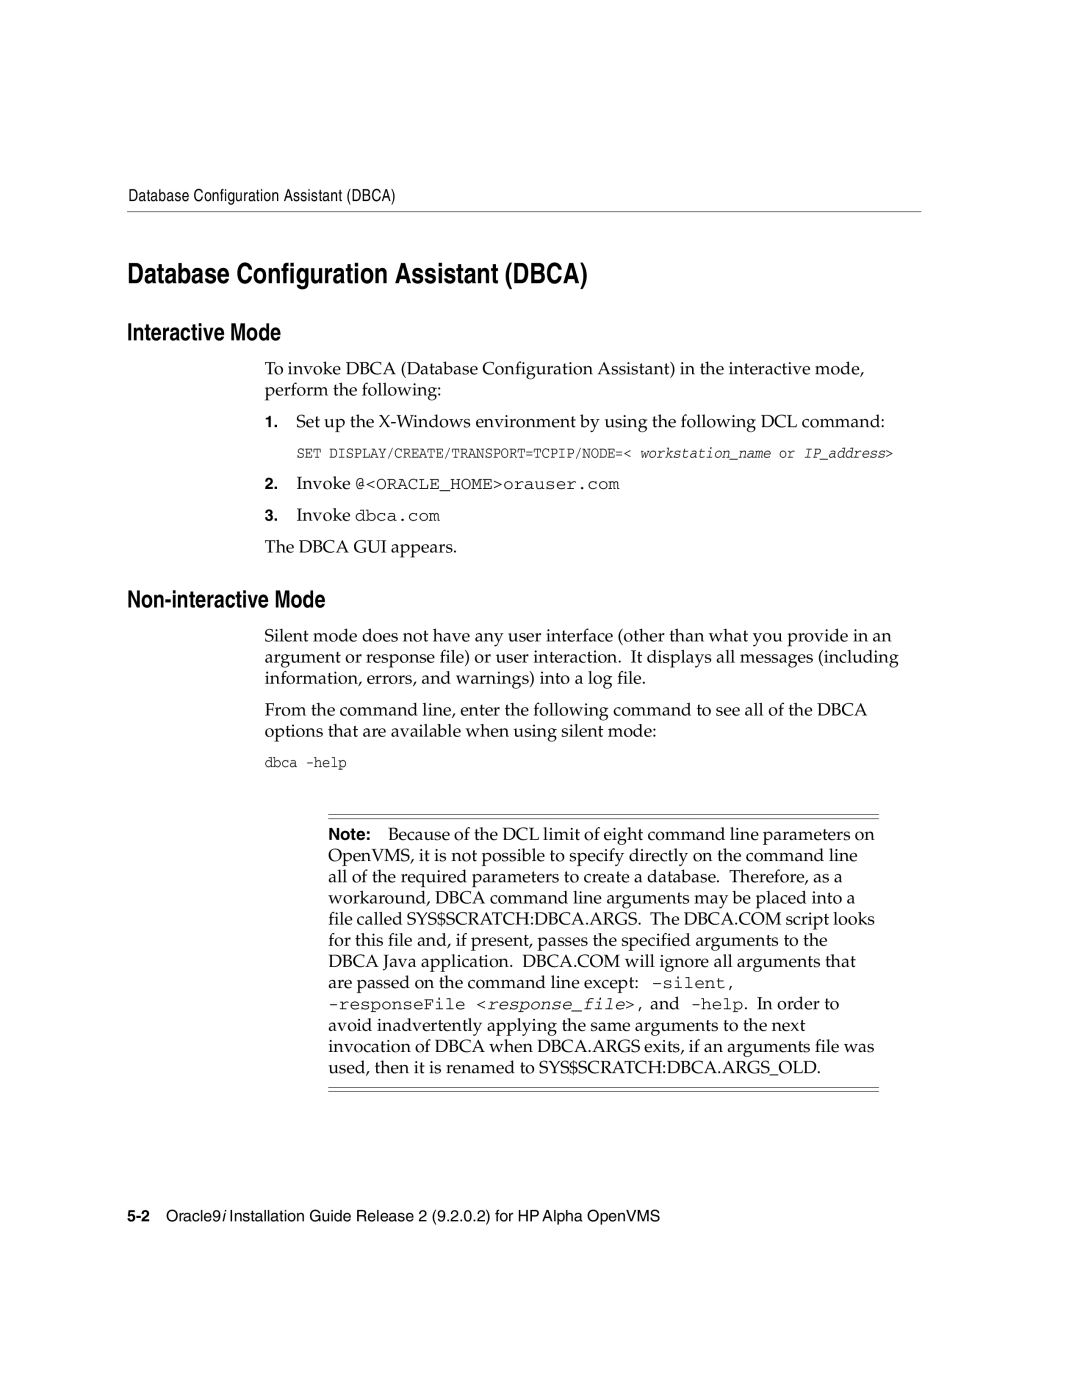 Oracle Audio Technologies B10508-01 manual Database Configuration Assistant Dbca, Interactive Mode, Non-interactive Mode 